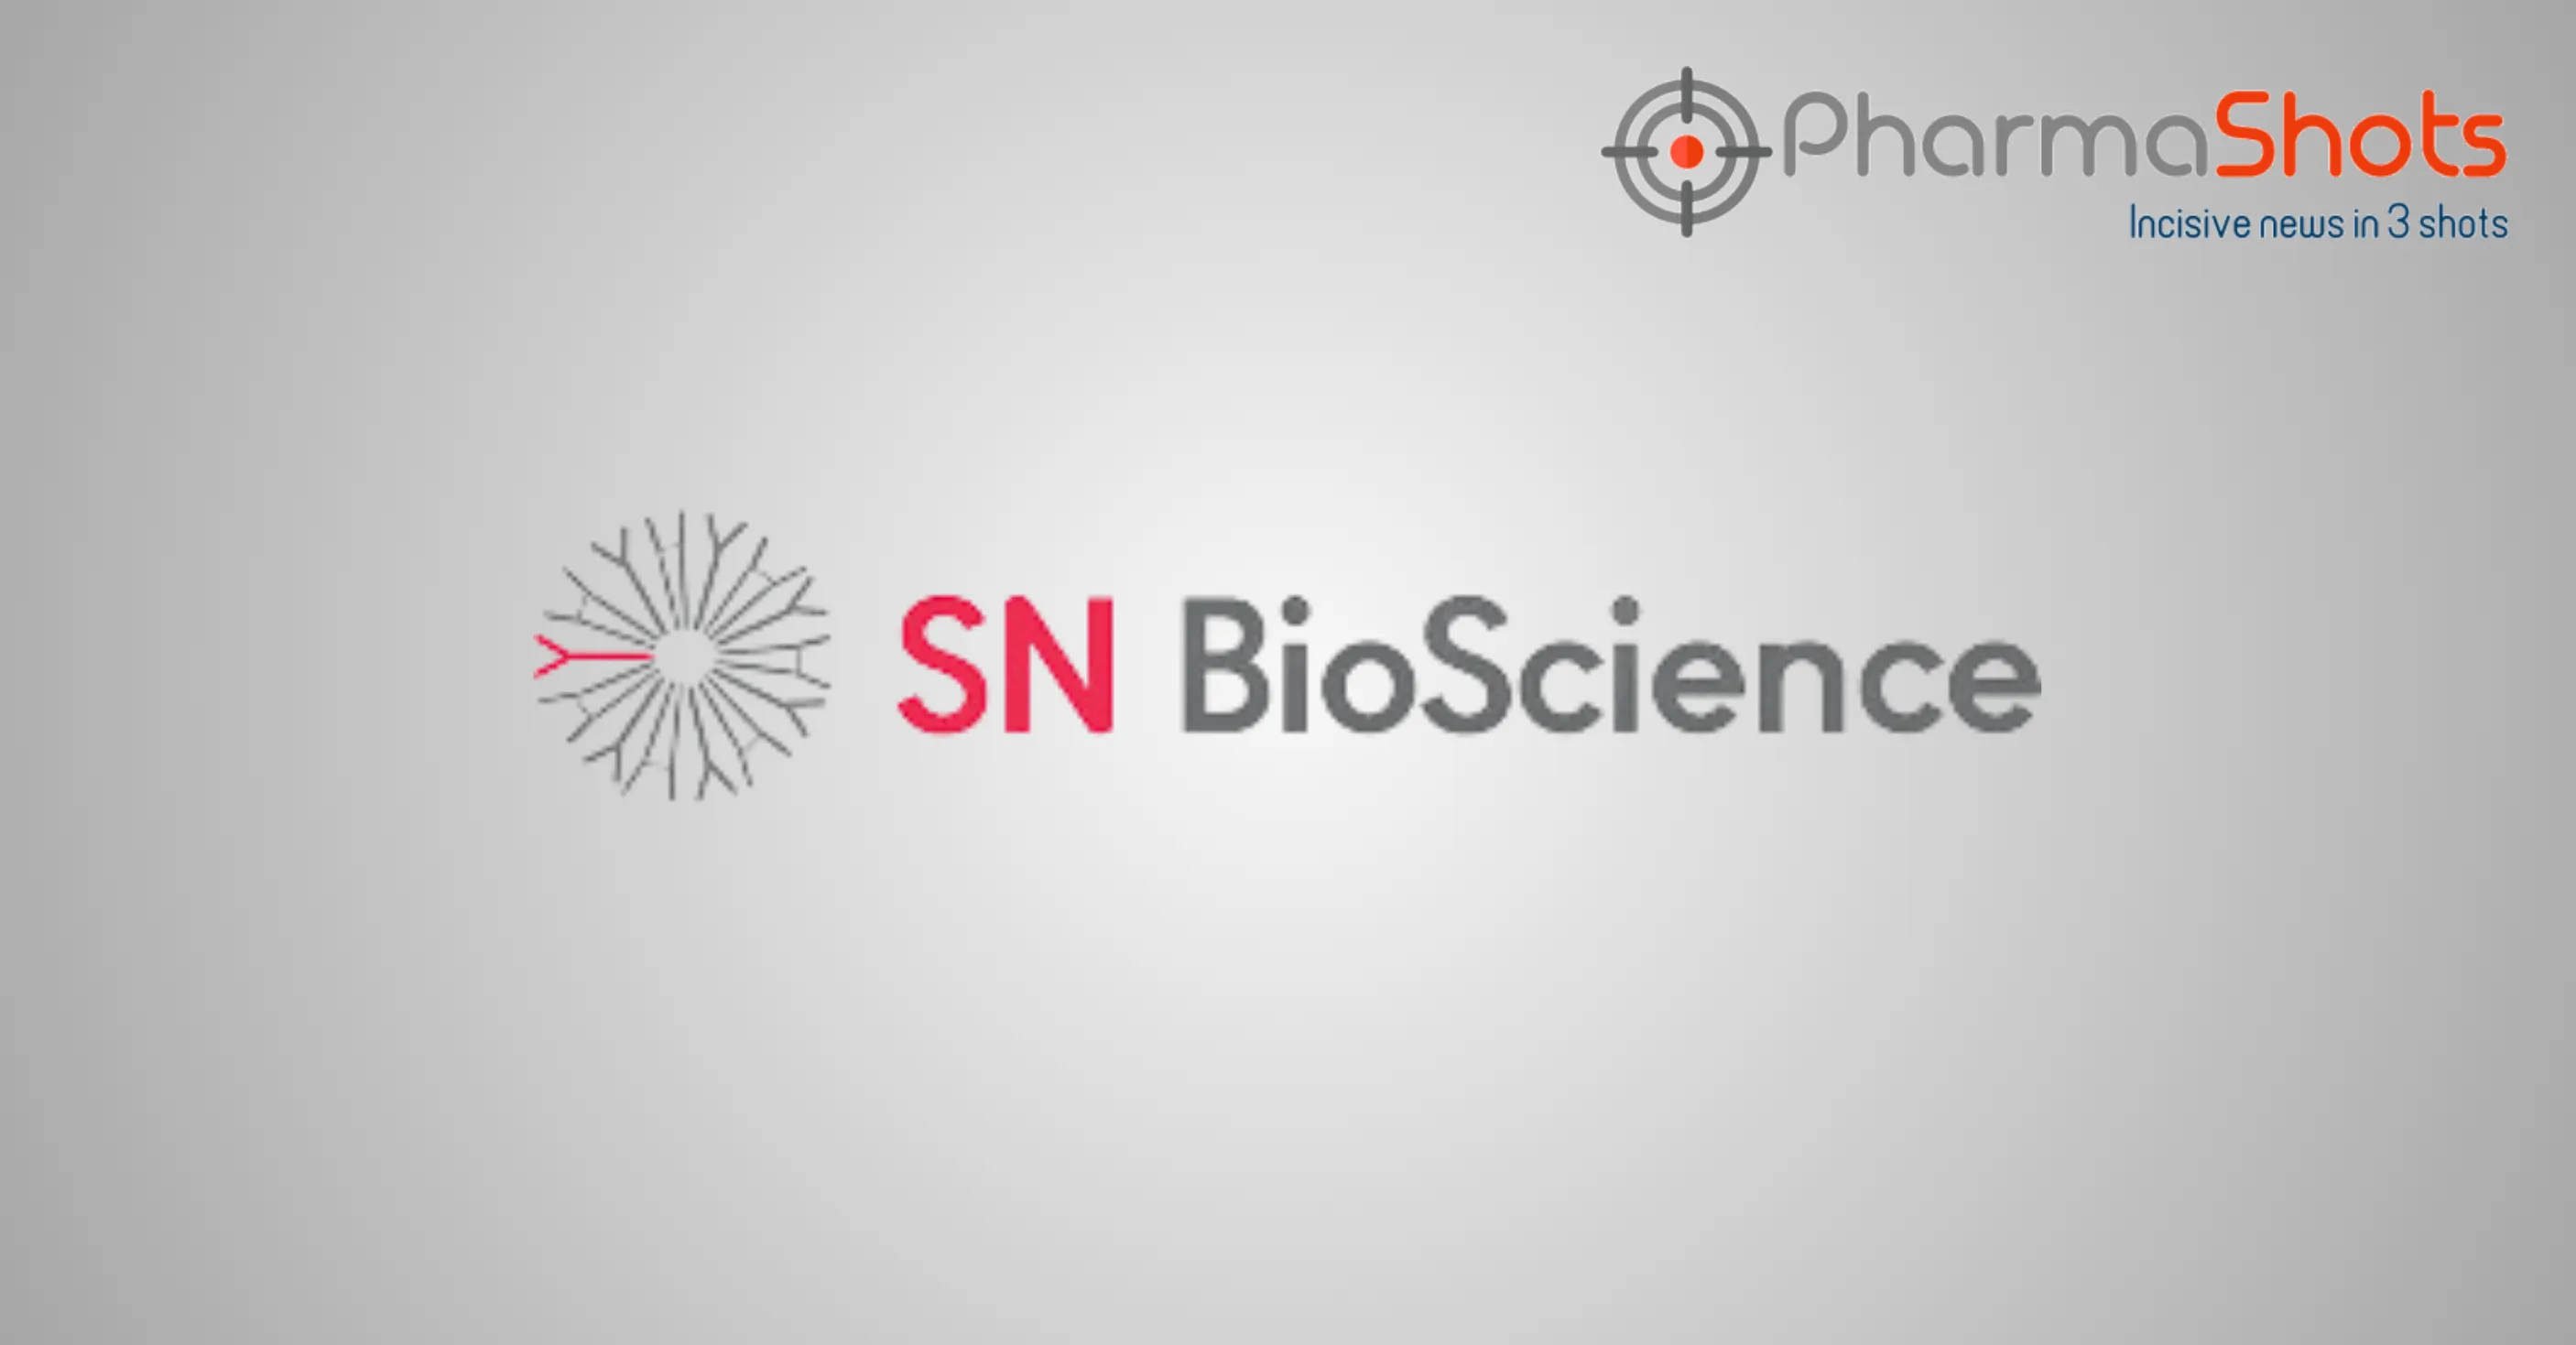 SN Bioscience’s SNB-101 Gains the US FDA’s Fast Track Designation for Small Cell Lung Cancer